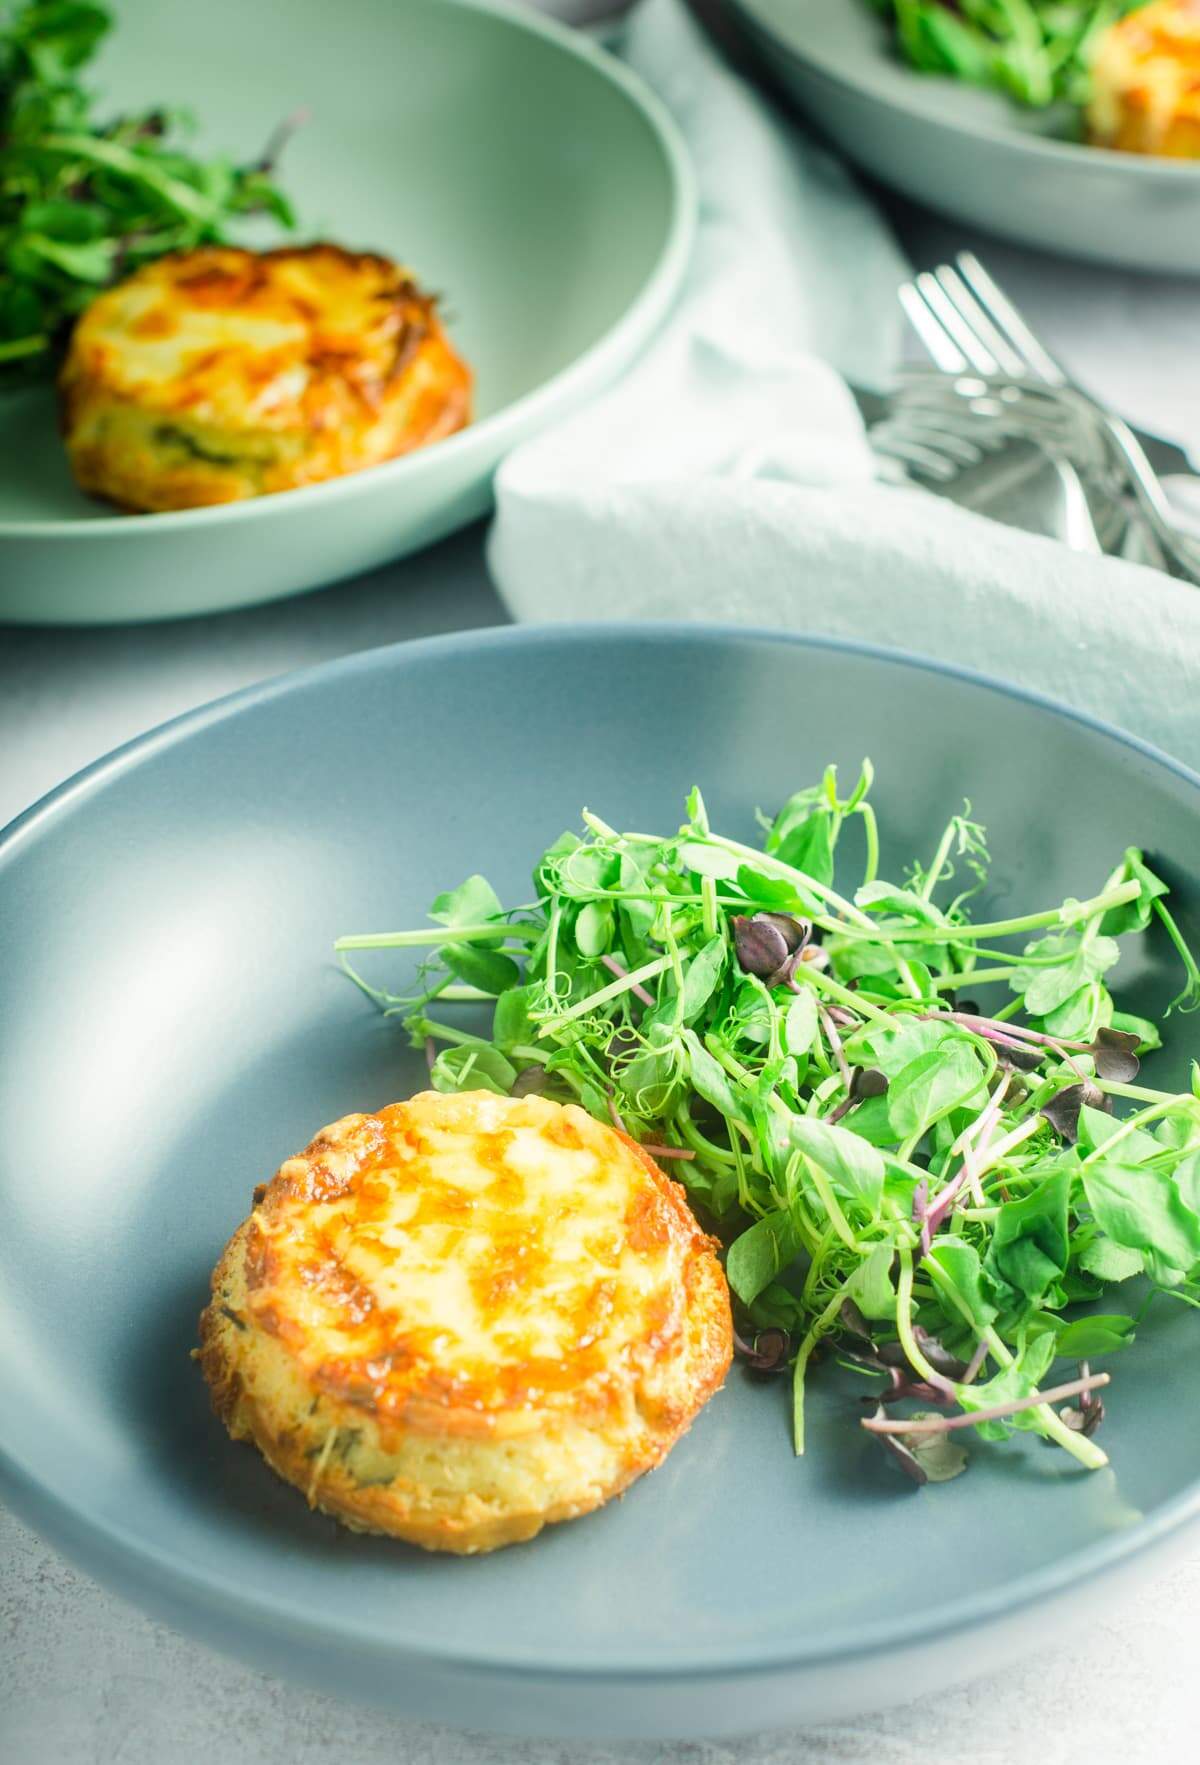 A table setting of 3 plates serving twice baked cheese souffles with side green salad.